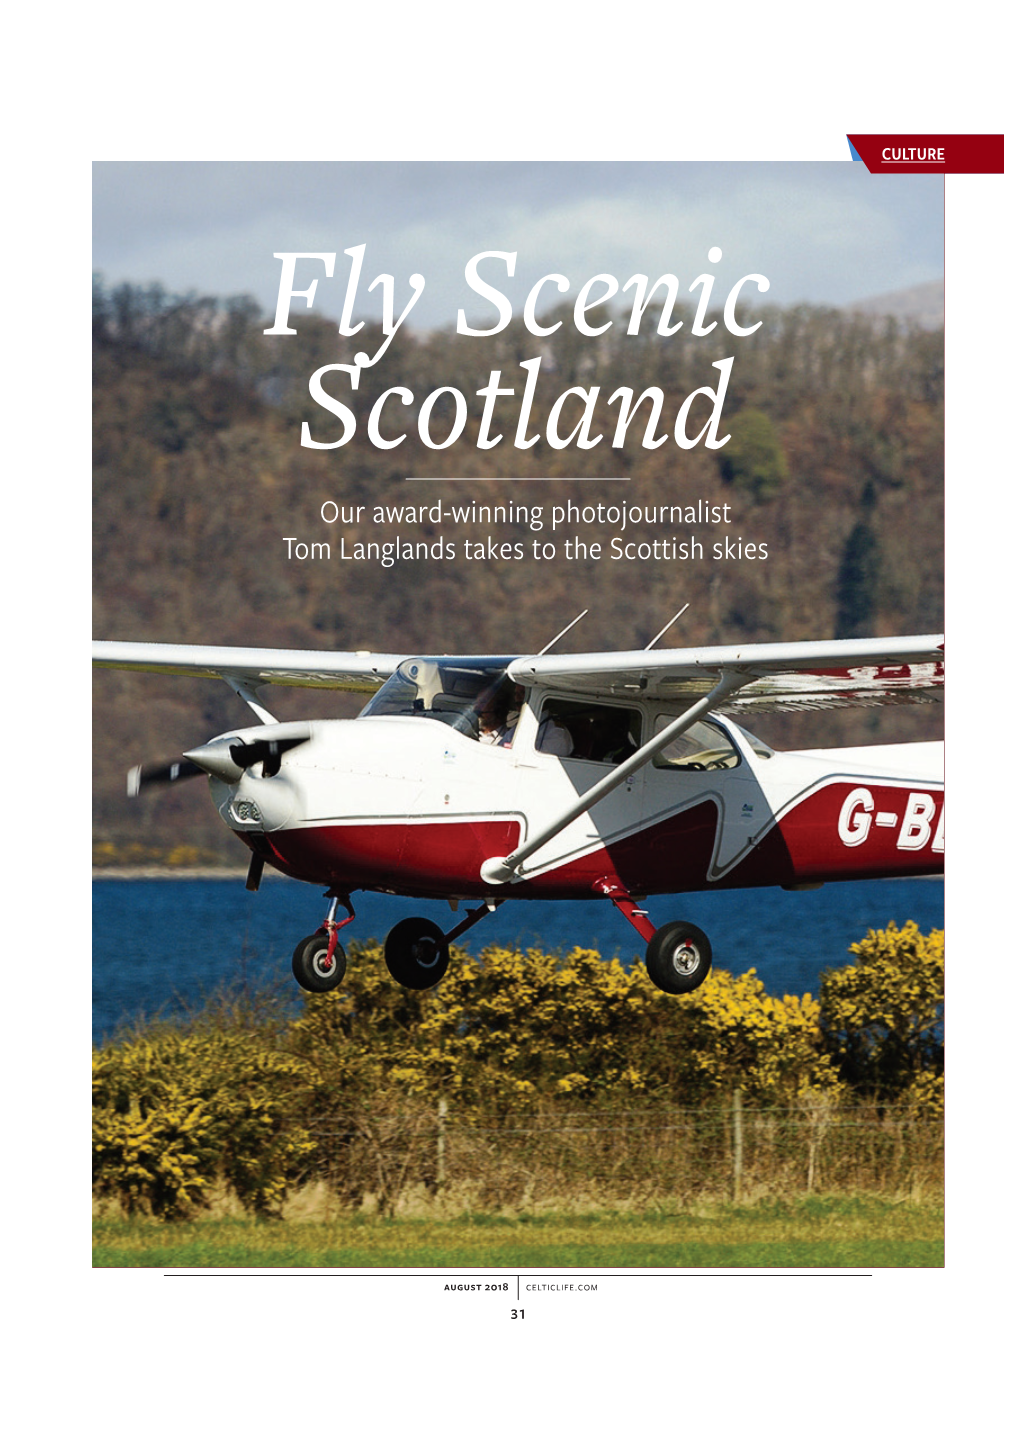 Fly Scenic Scotland, Which It Has We Did a Double Circuit Around the Clachan Bridge, Also Known Restructured and Rebranded